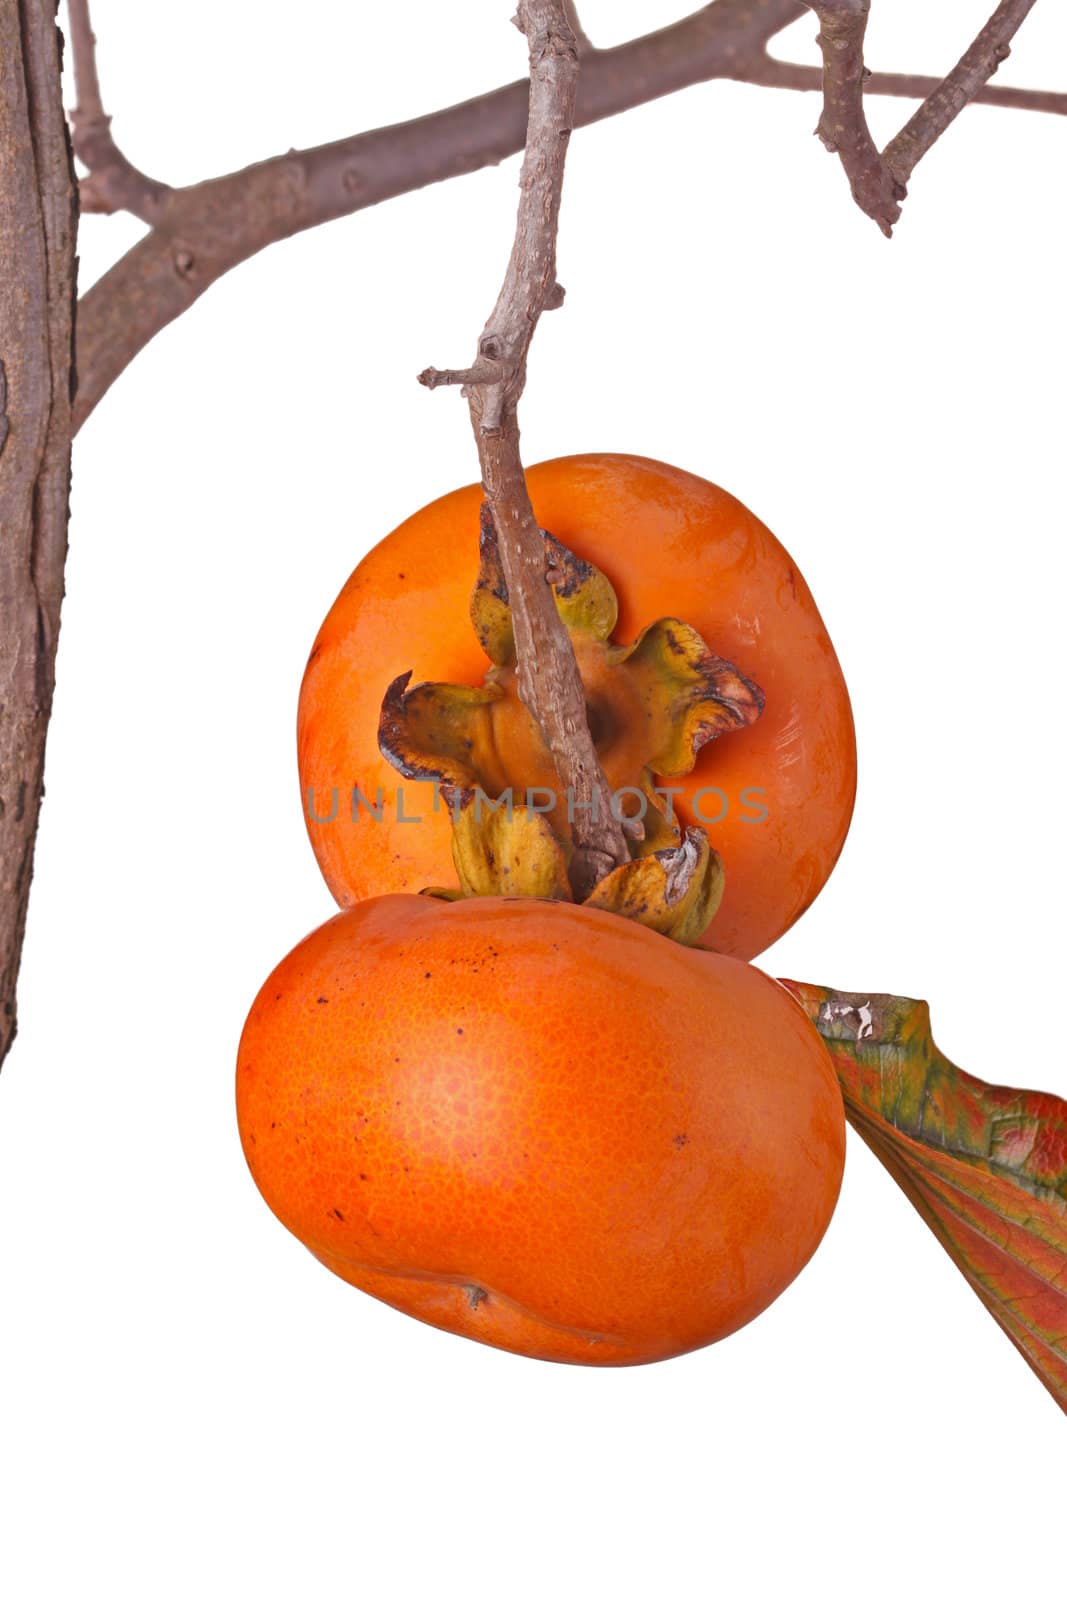 Two ripe persimmons isolated against white by sgoodwin4813